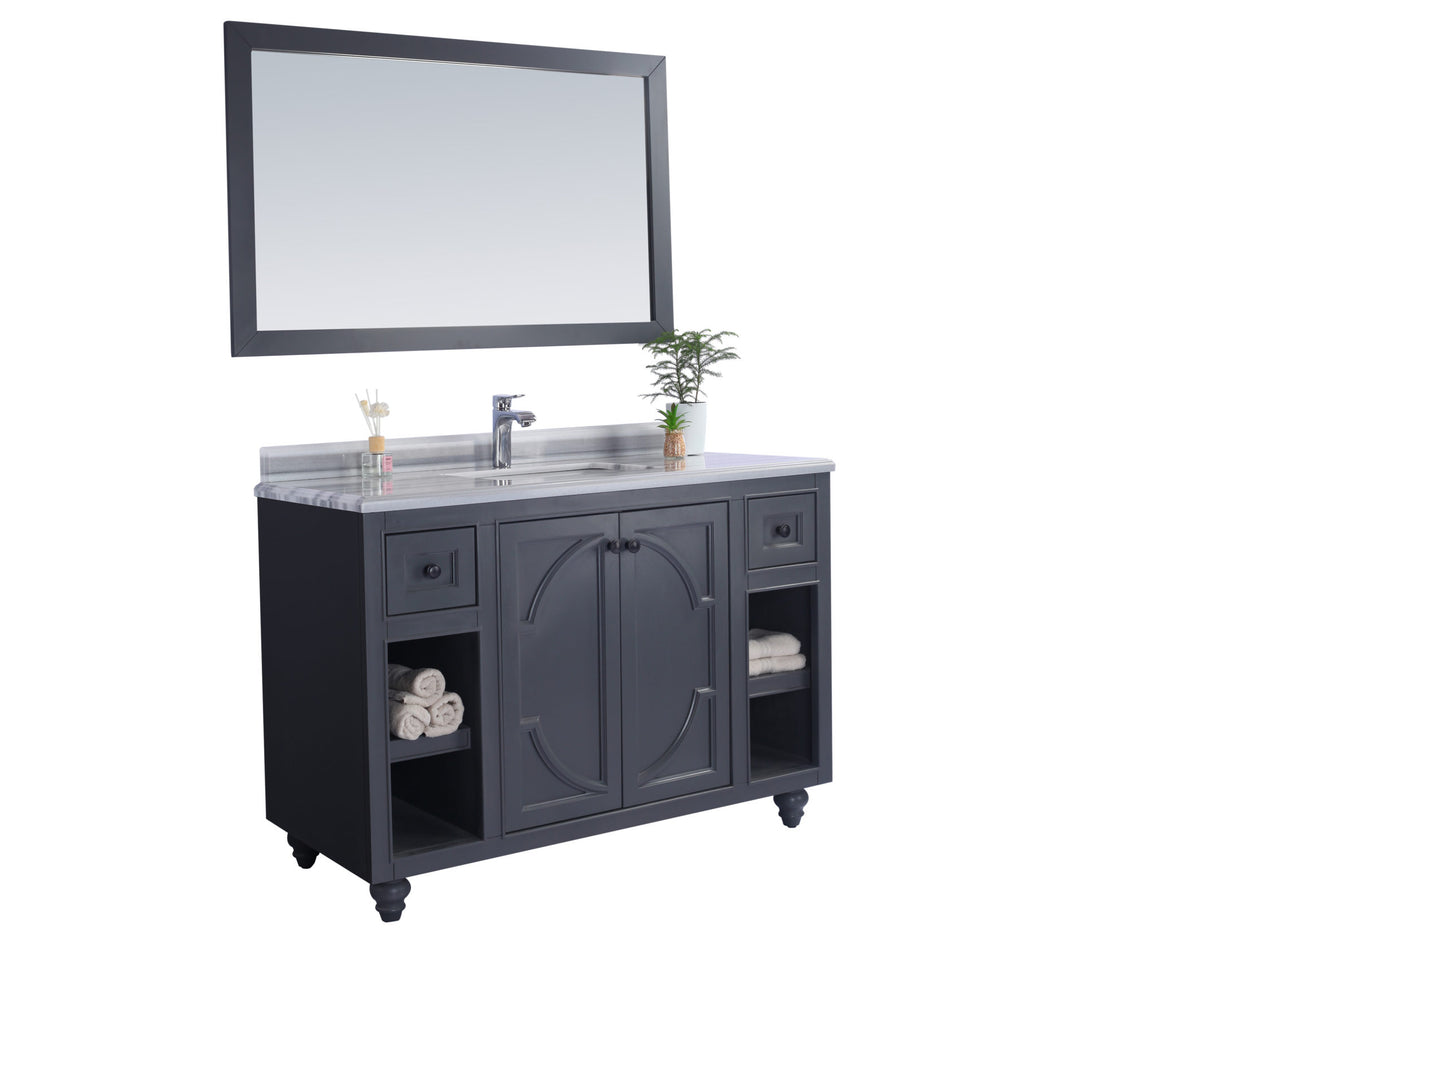 Odyssey 48" Maple Grey Bathroom Vanity with White Stripes Marble Countertop